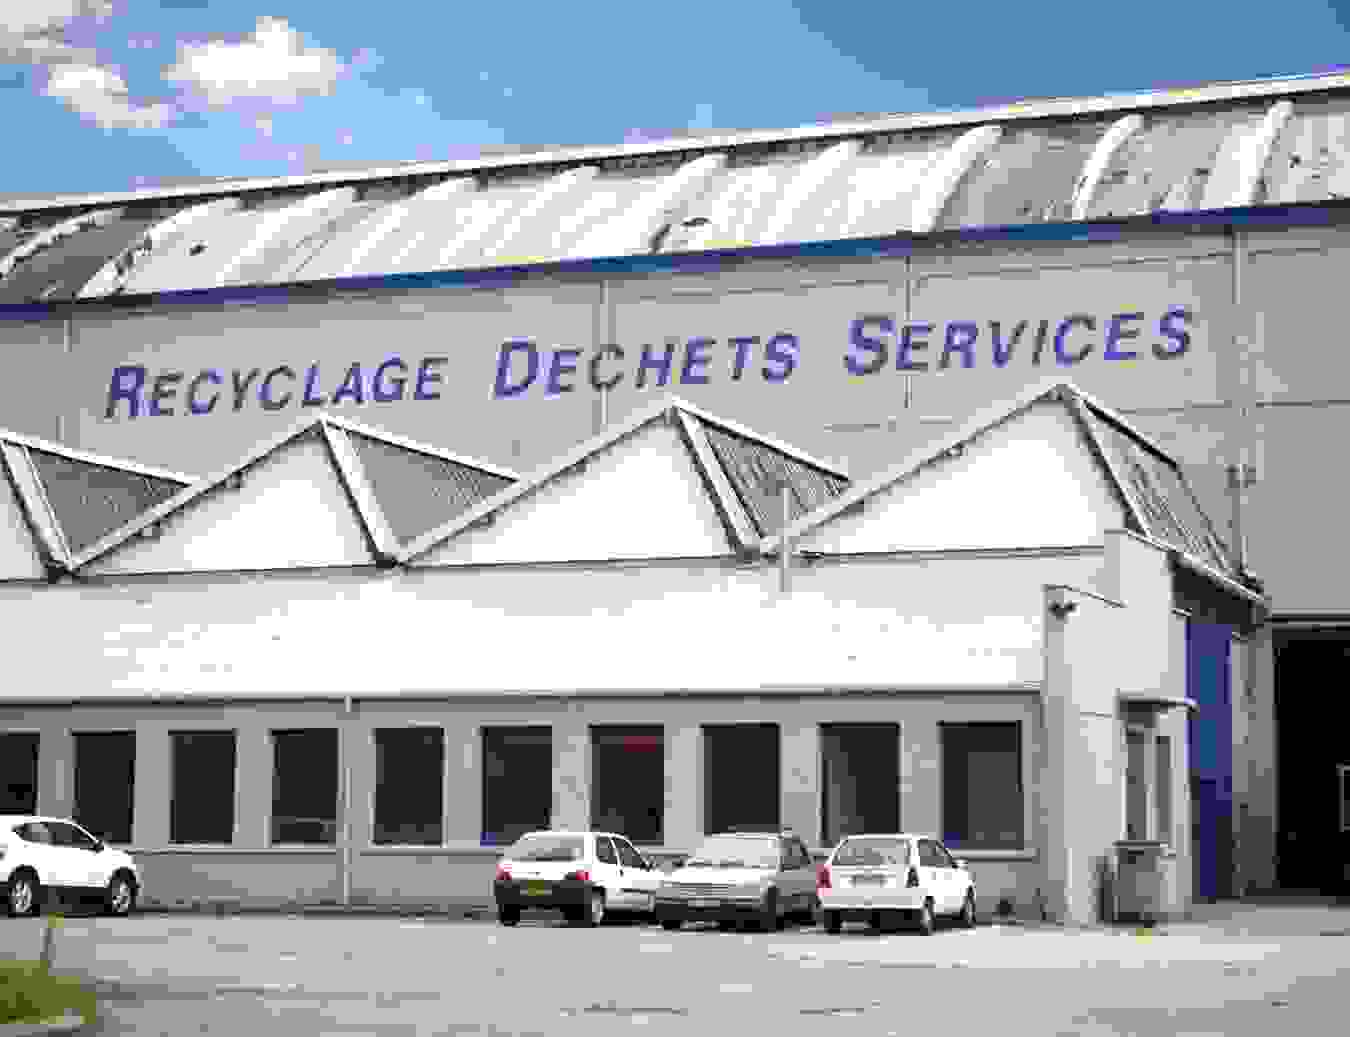 Recyclage dechets services